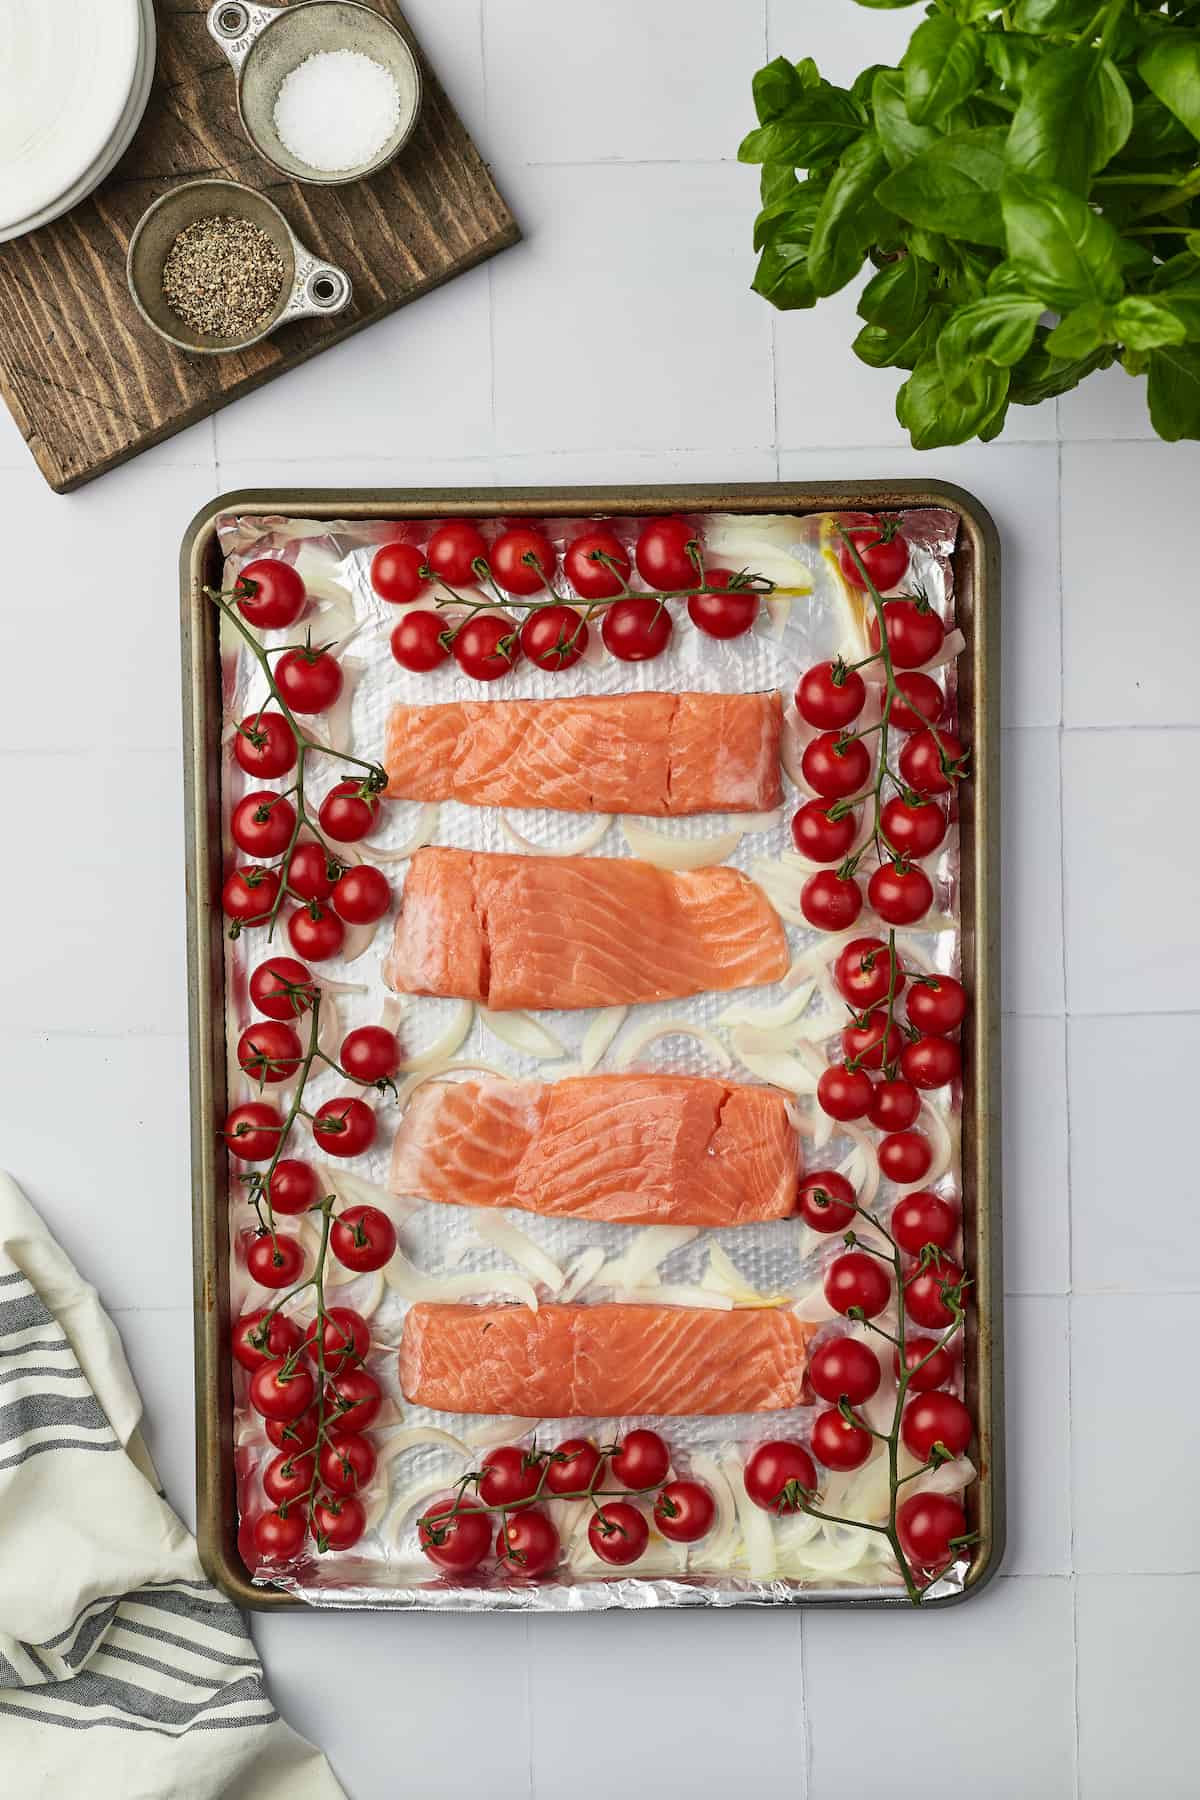 Overhead view of salmon fillets arranged on pan with cherry tomatoes